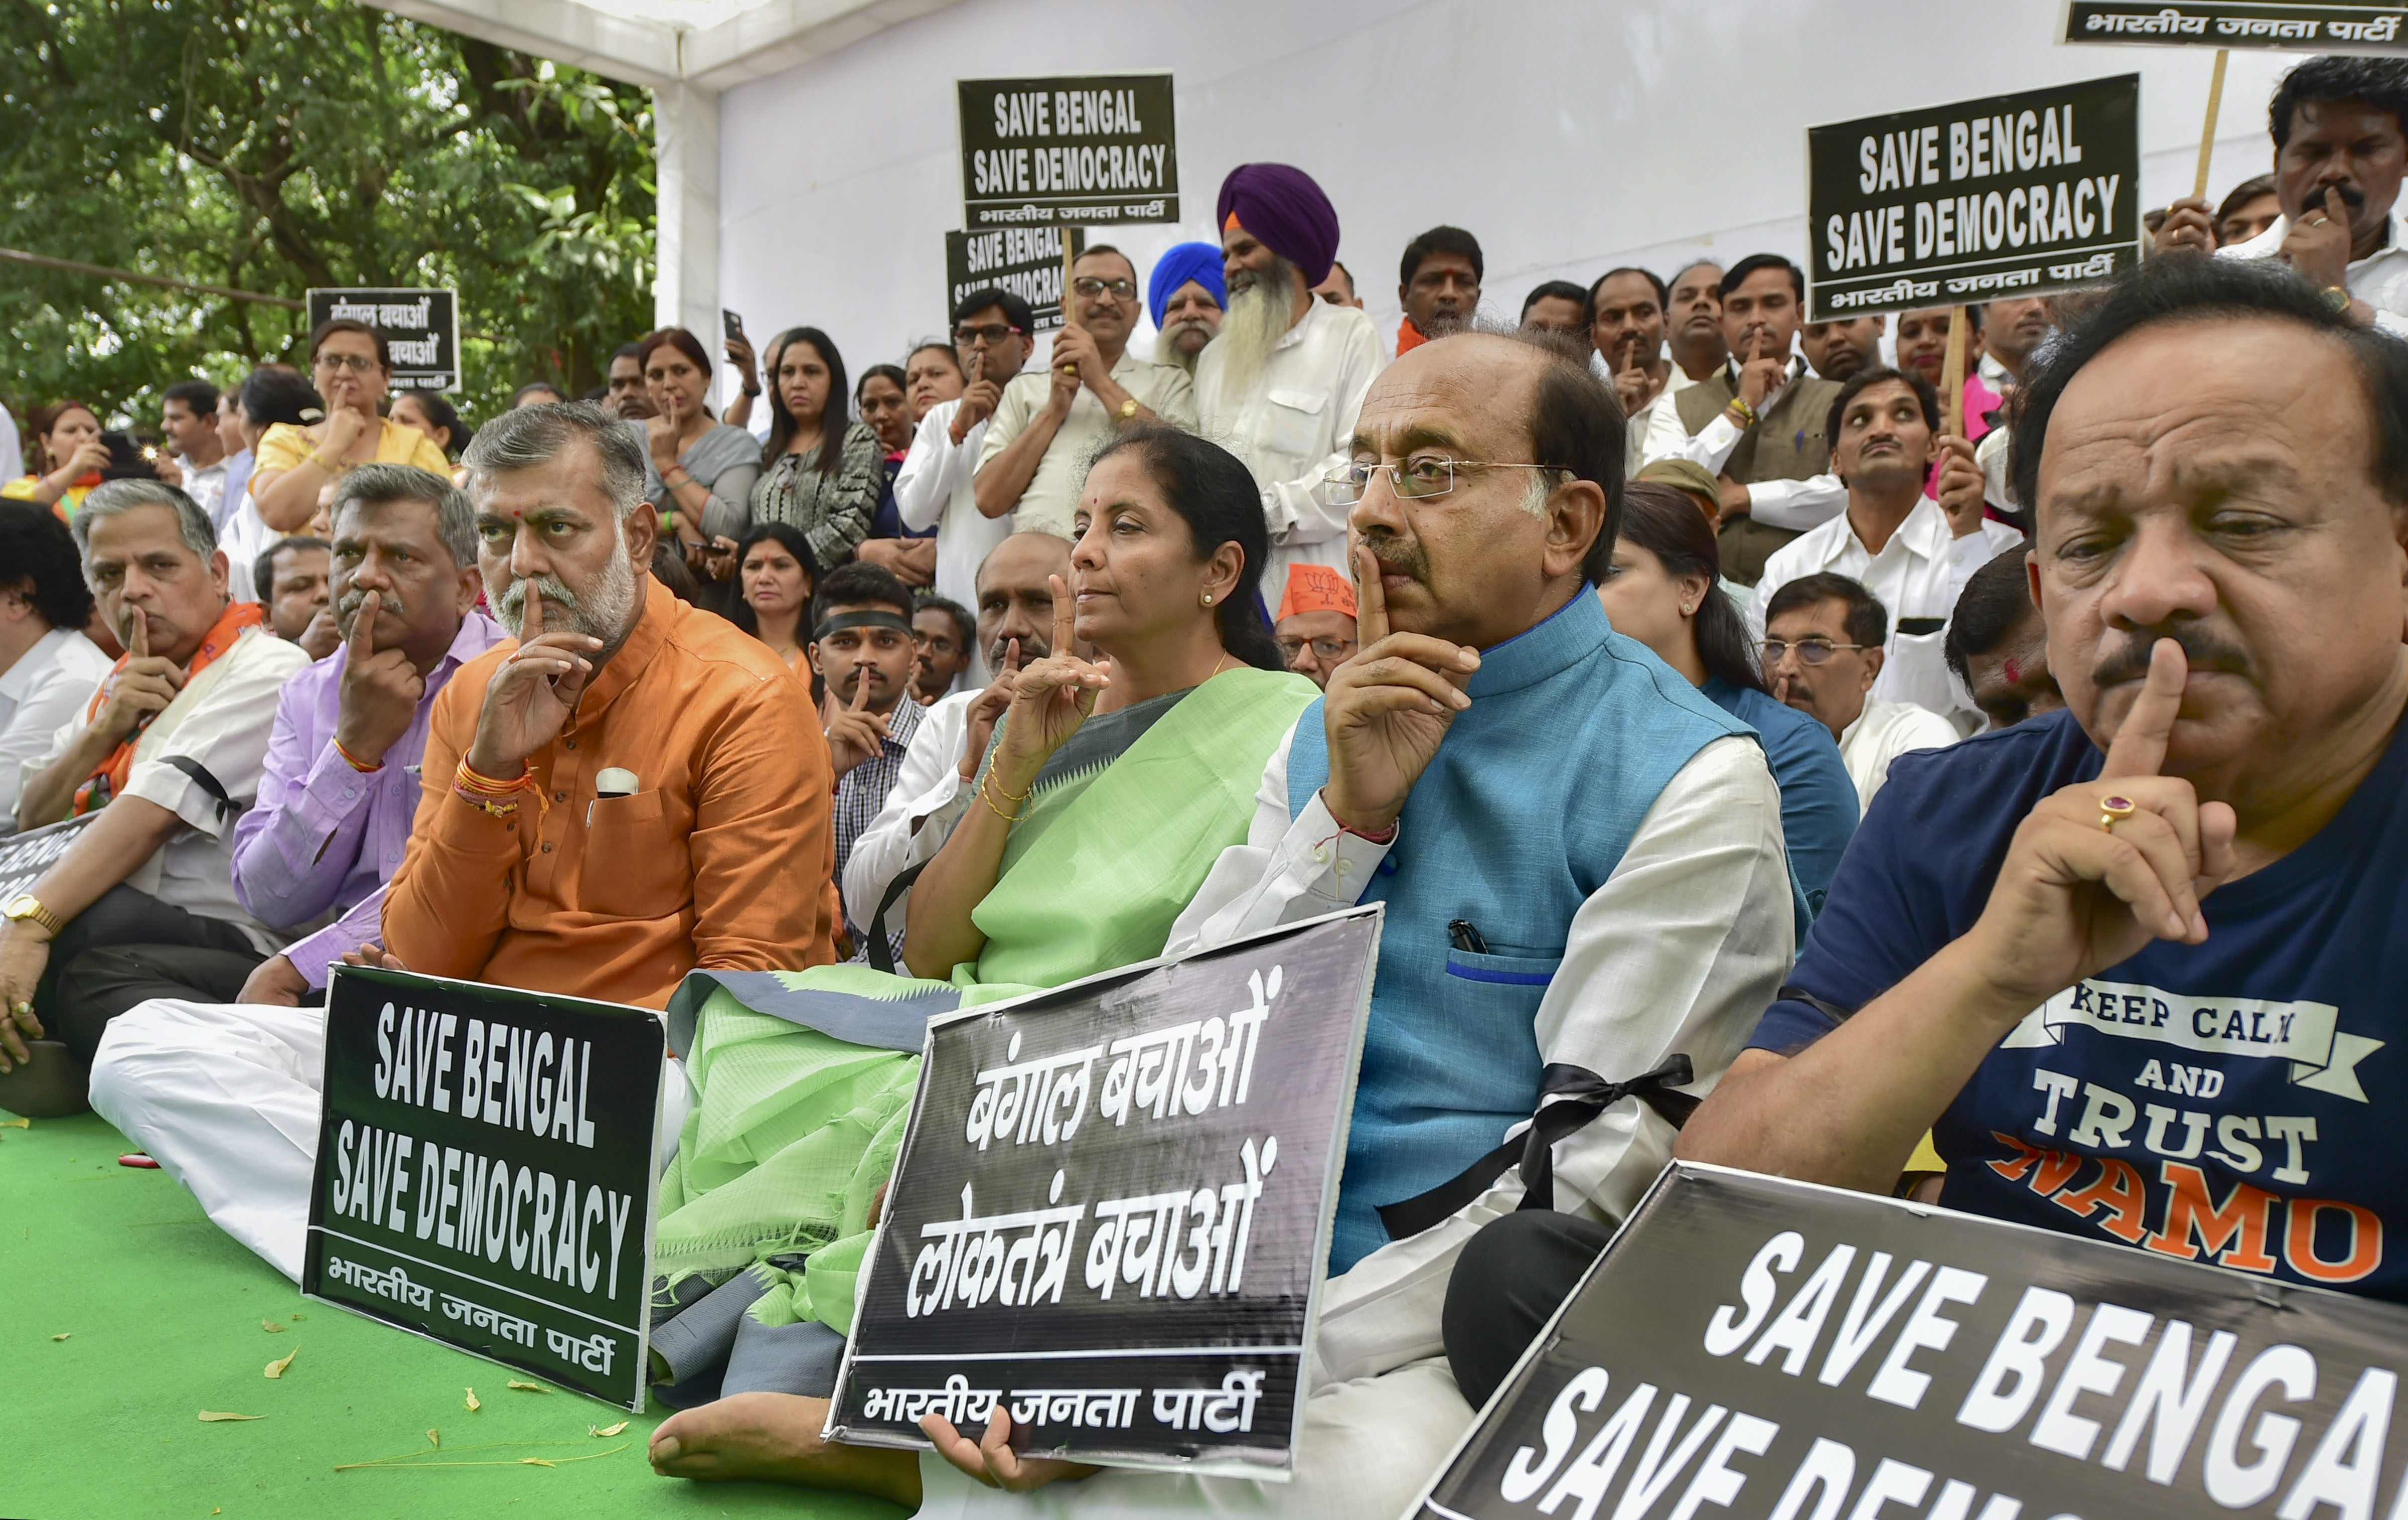 BJP leaders Harsh Vardhan, Vijay Goel, Nirmala Sitharaman and others take part in a silent protest against the clashes that broke out during BJP President Amit Shah's roadshow in Kolkata yesterday, in New Delhi - PTI